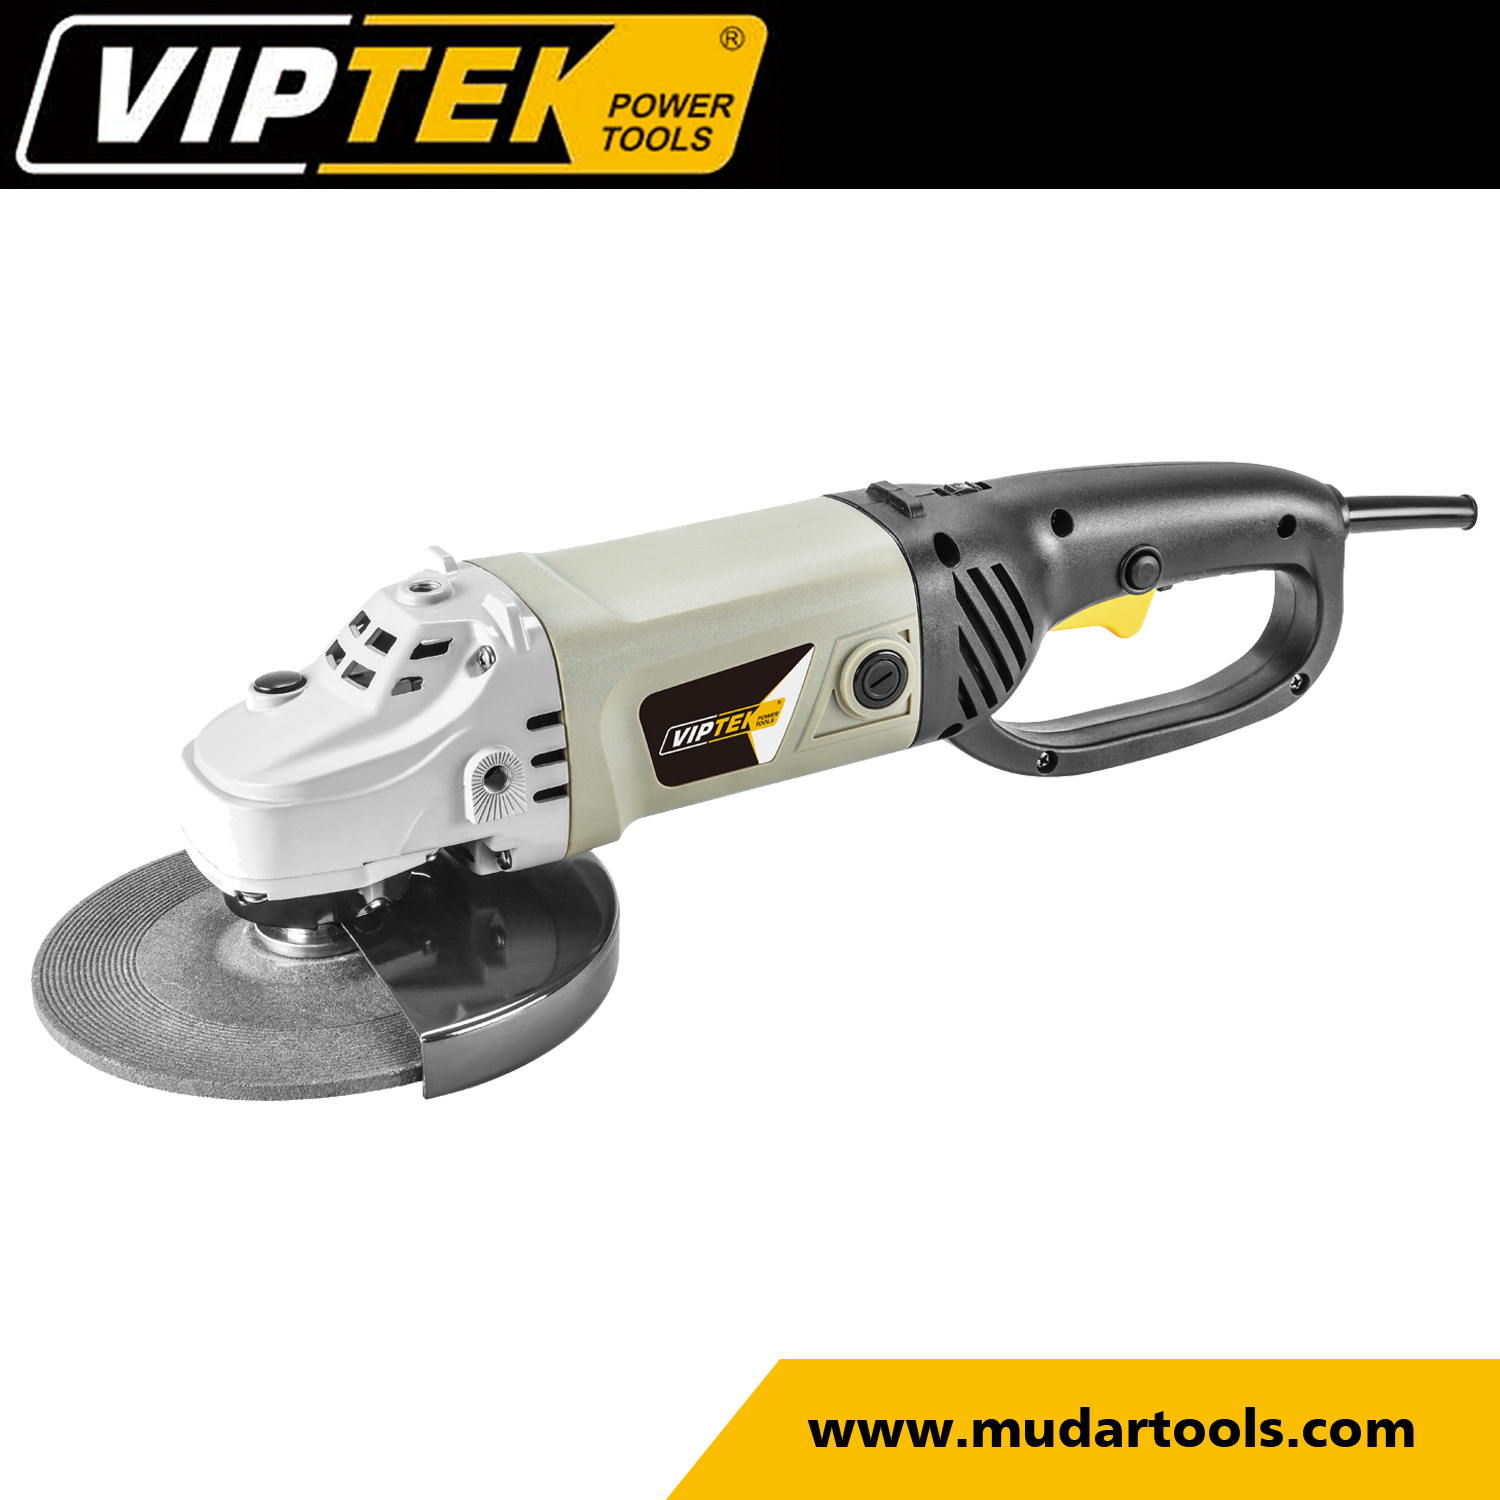 180mm Angle Grinder Tools Lower Price Electric Angle Grinder